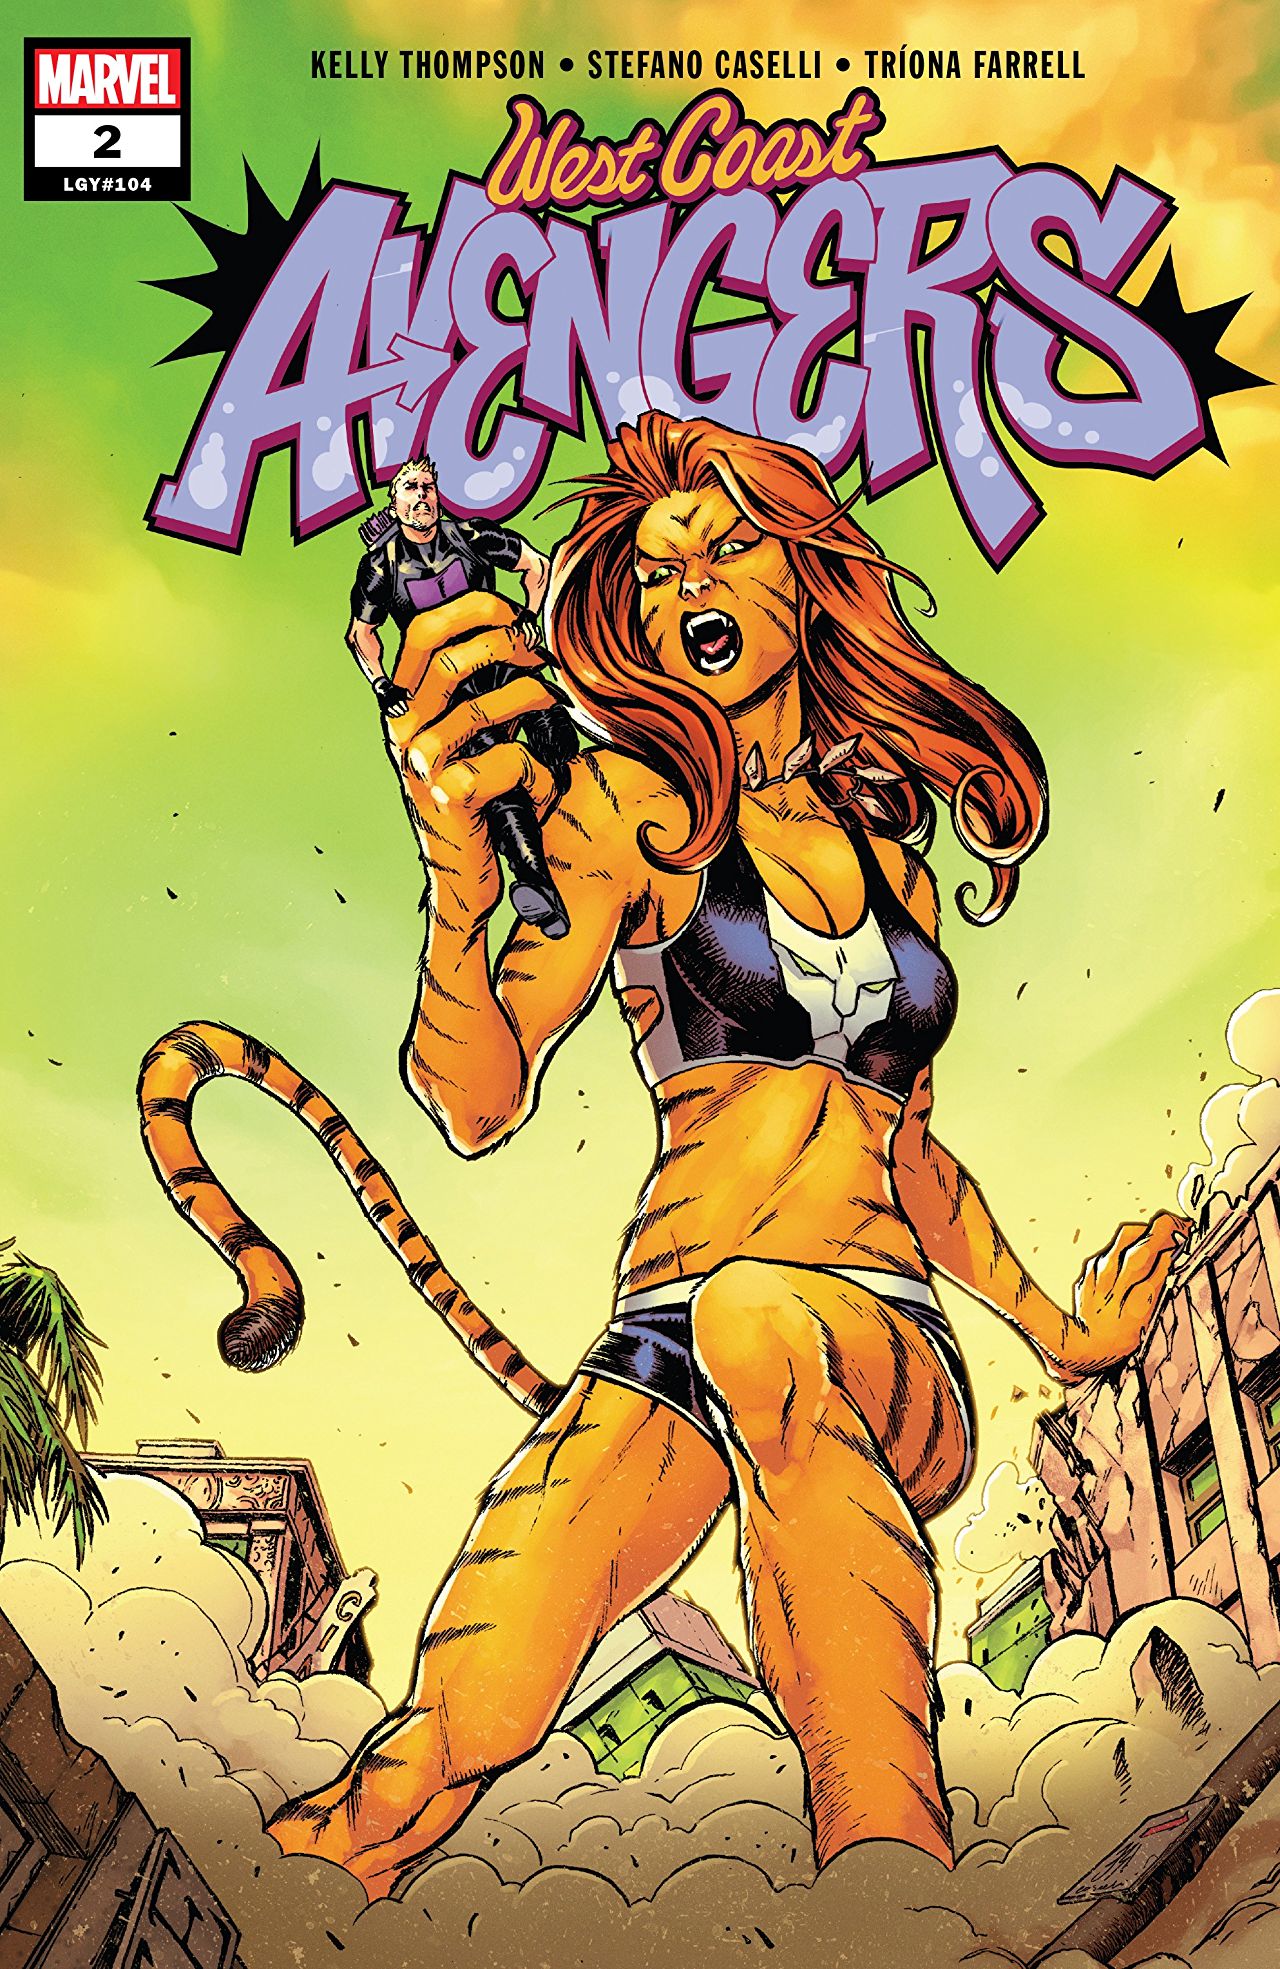 West Coast Avengers #2 review: Bringing the silly to an all ages audience